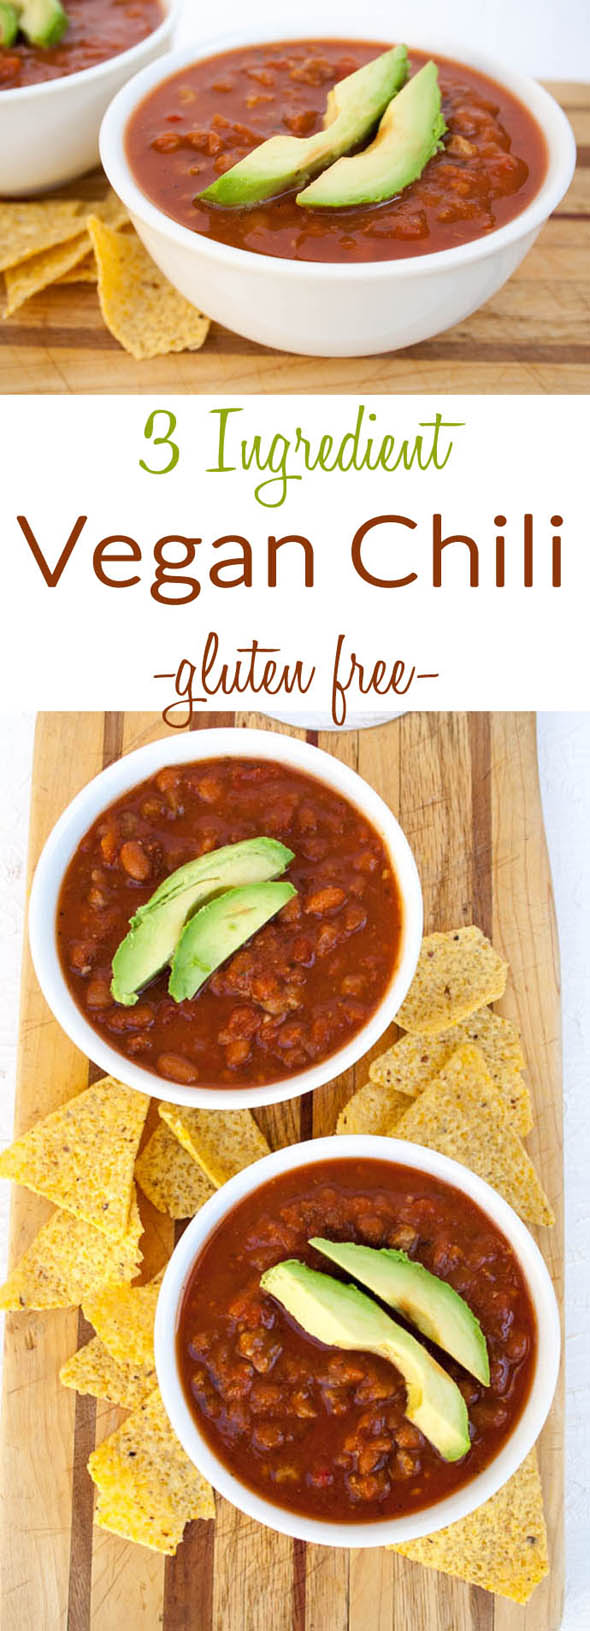 3 Ingredient Vegan Chili collage photo with text.